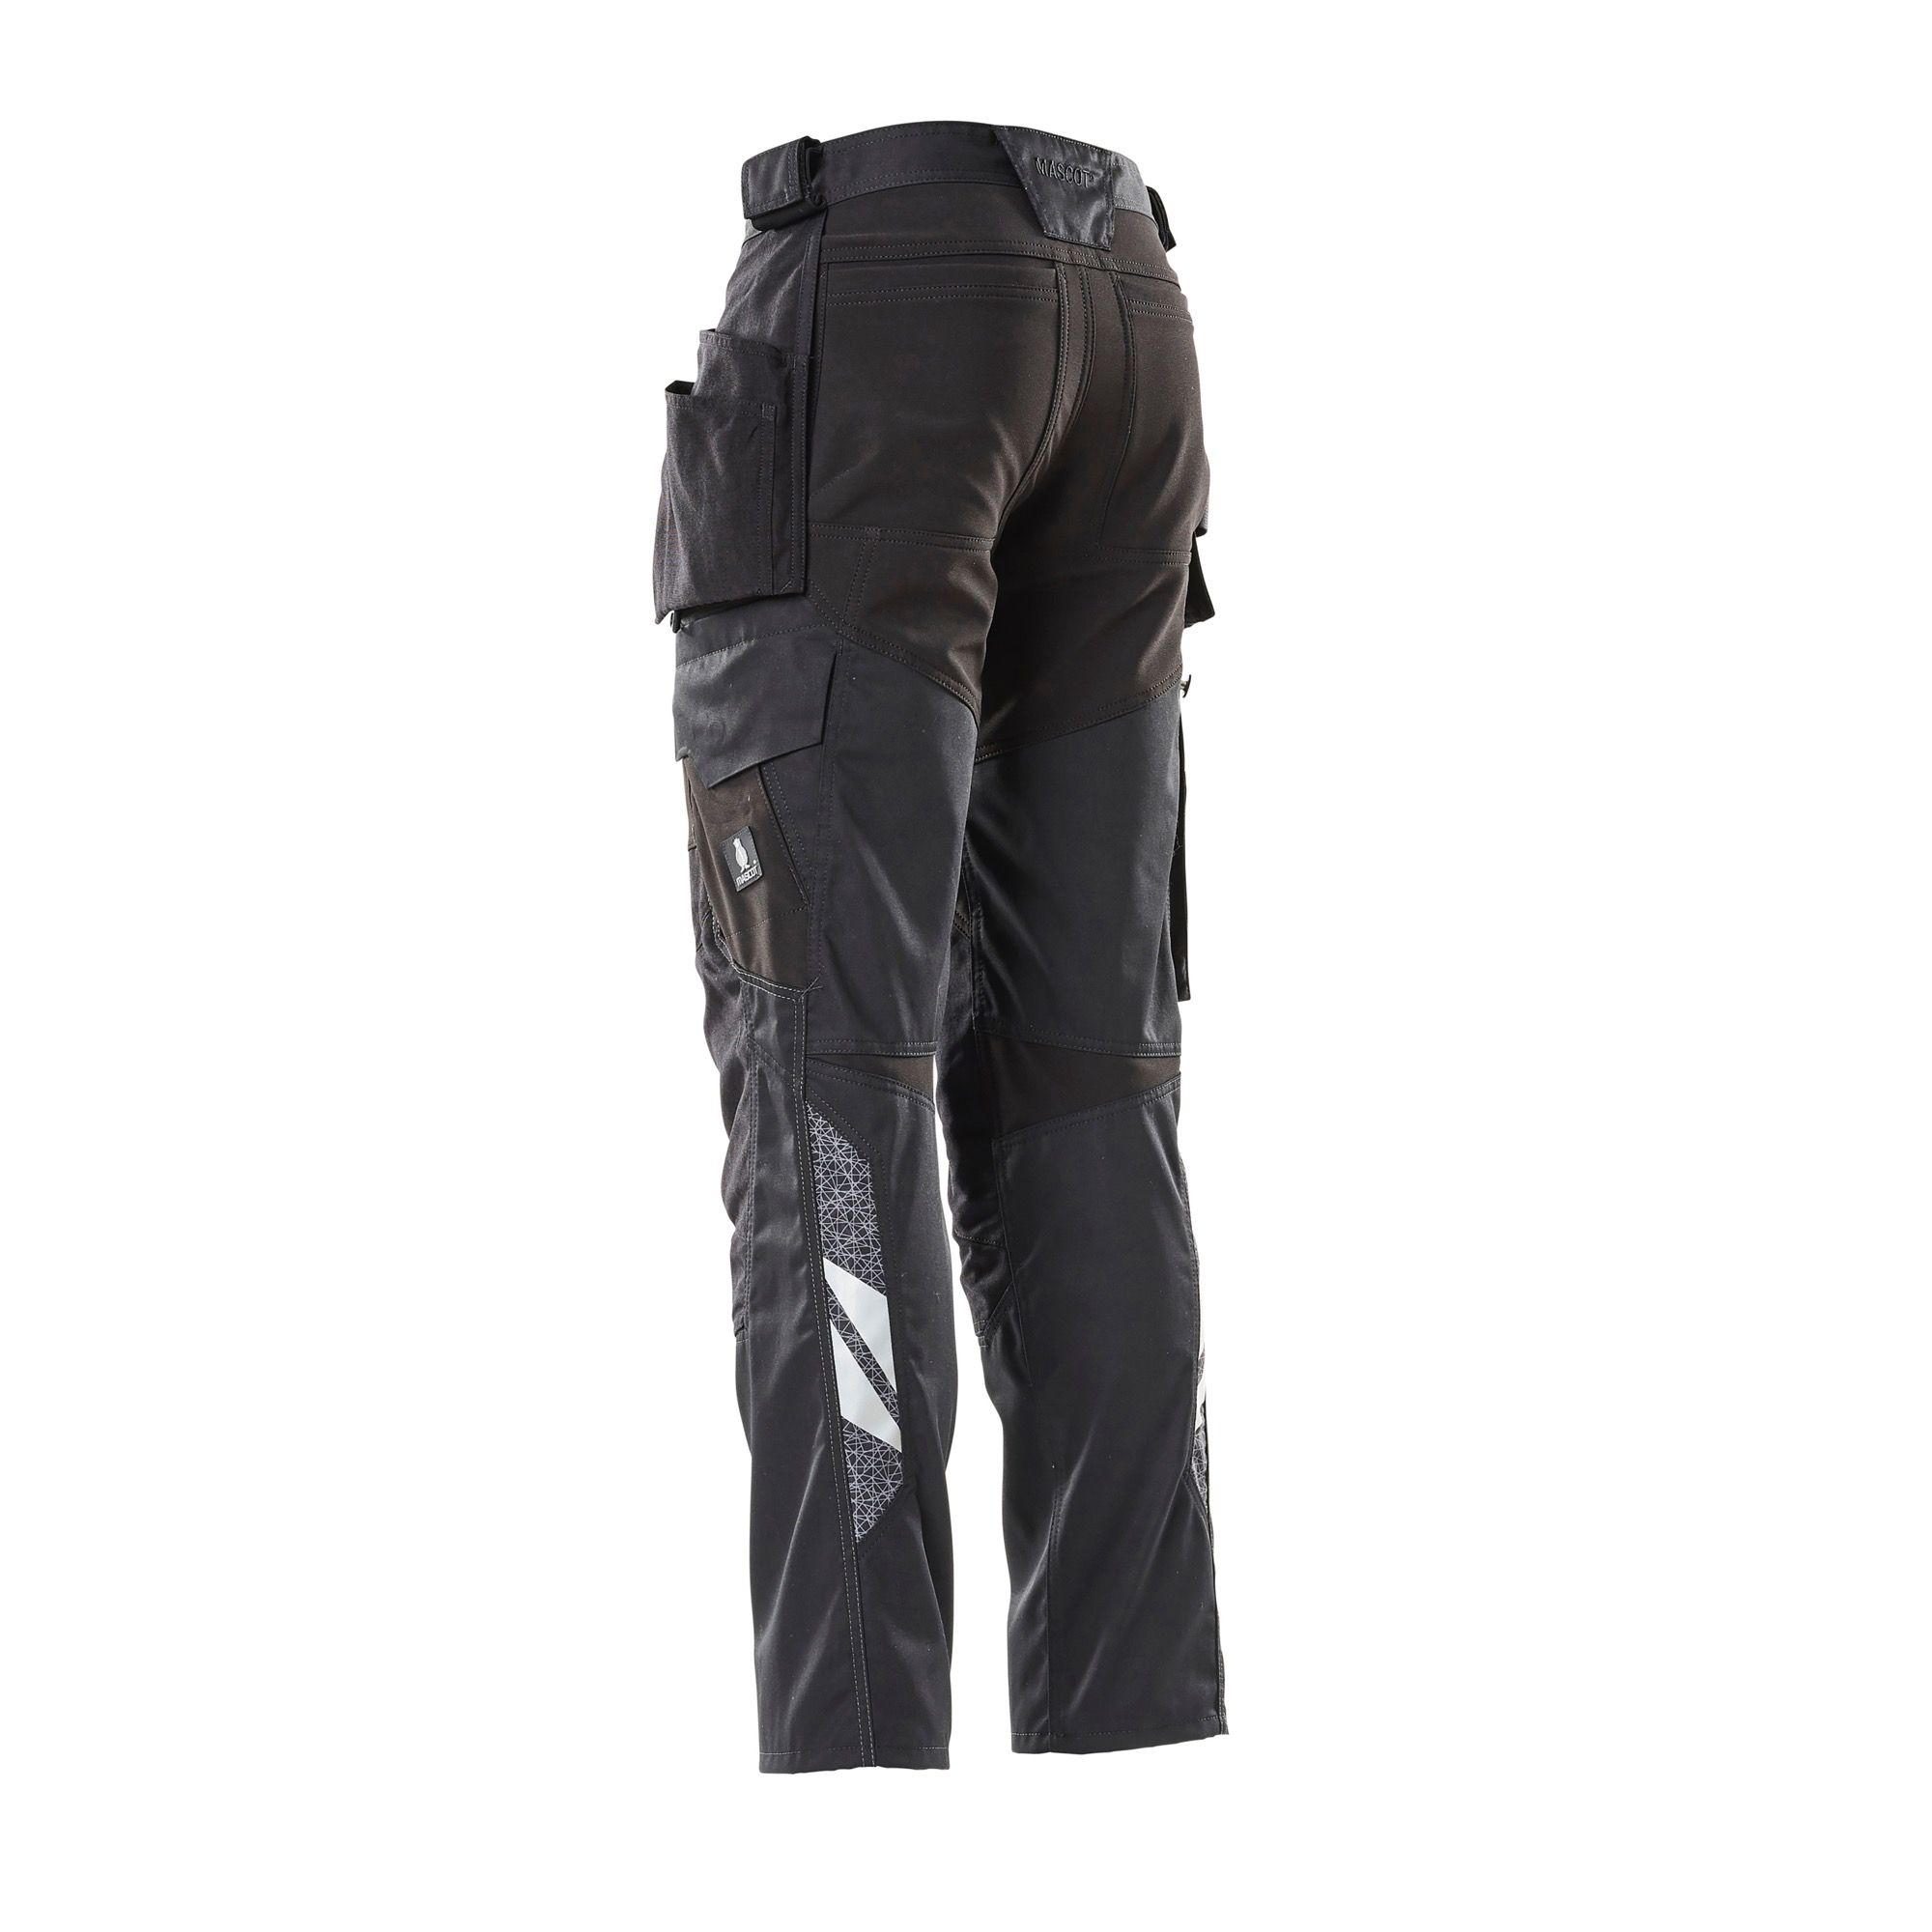 Mascot Holster Pocket Trousers Navy L30W34.5